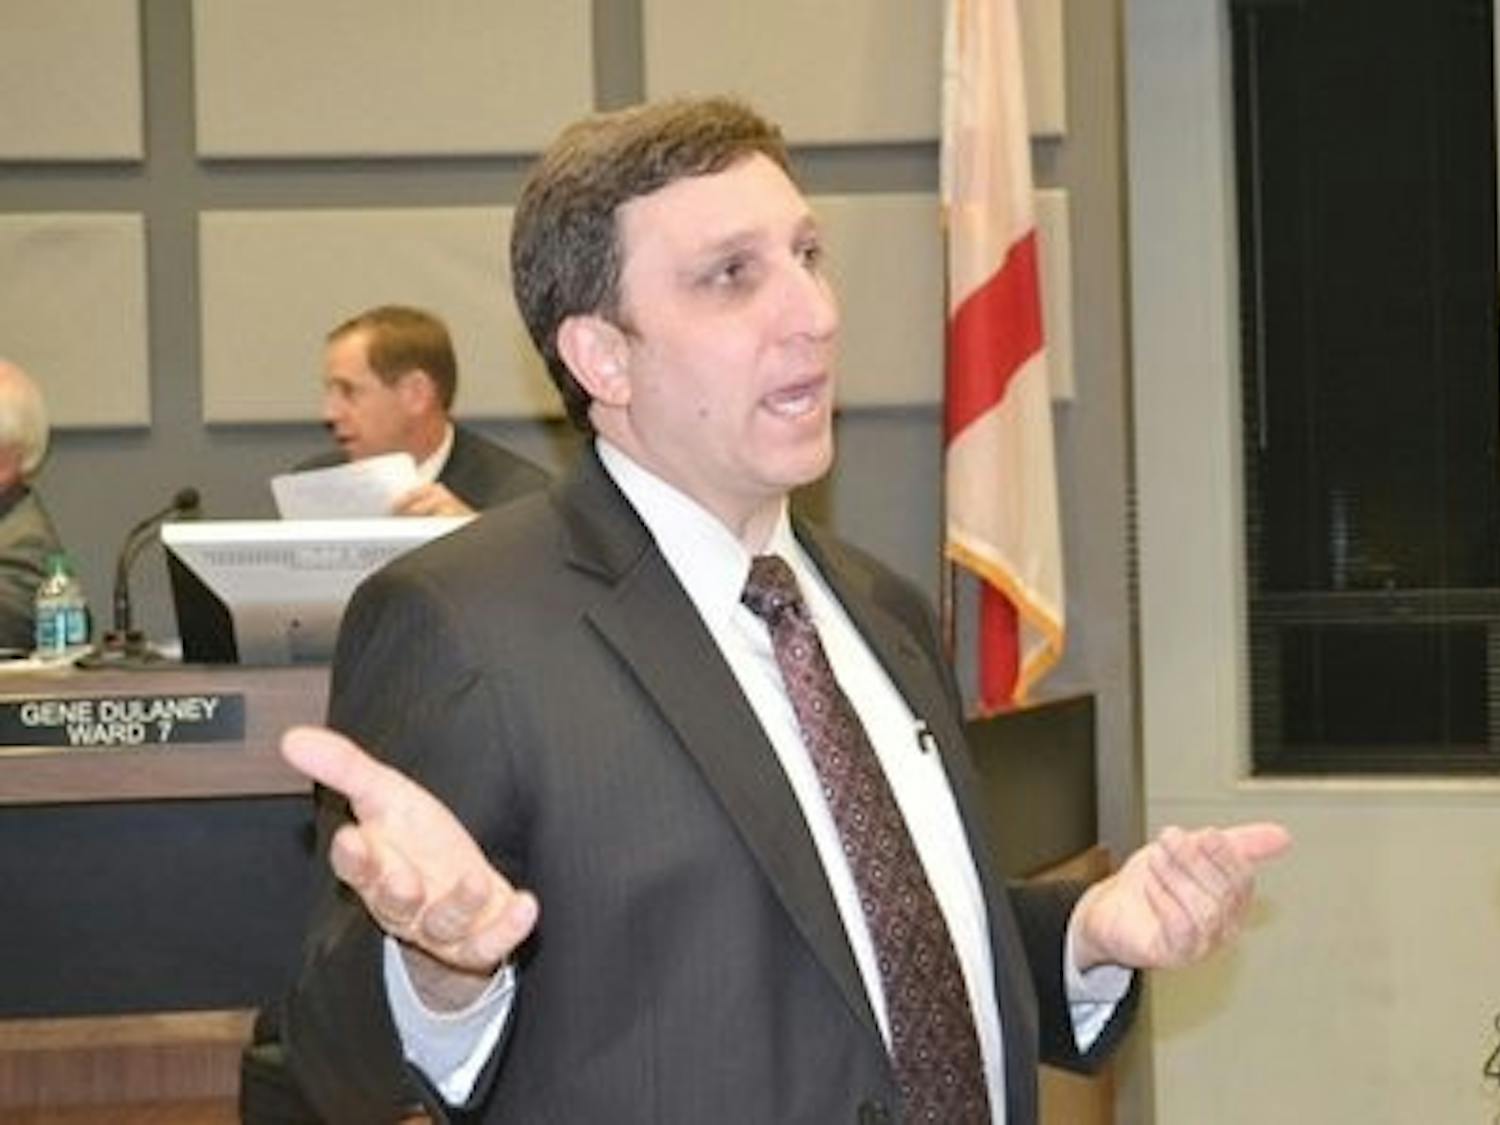 City Manager Charles Duggan Jr. spoke about increases in school funding. (Raye May / PHOTO EDITOR)